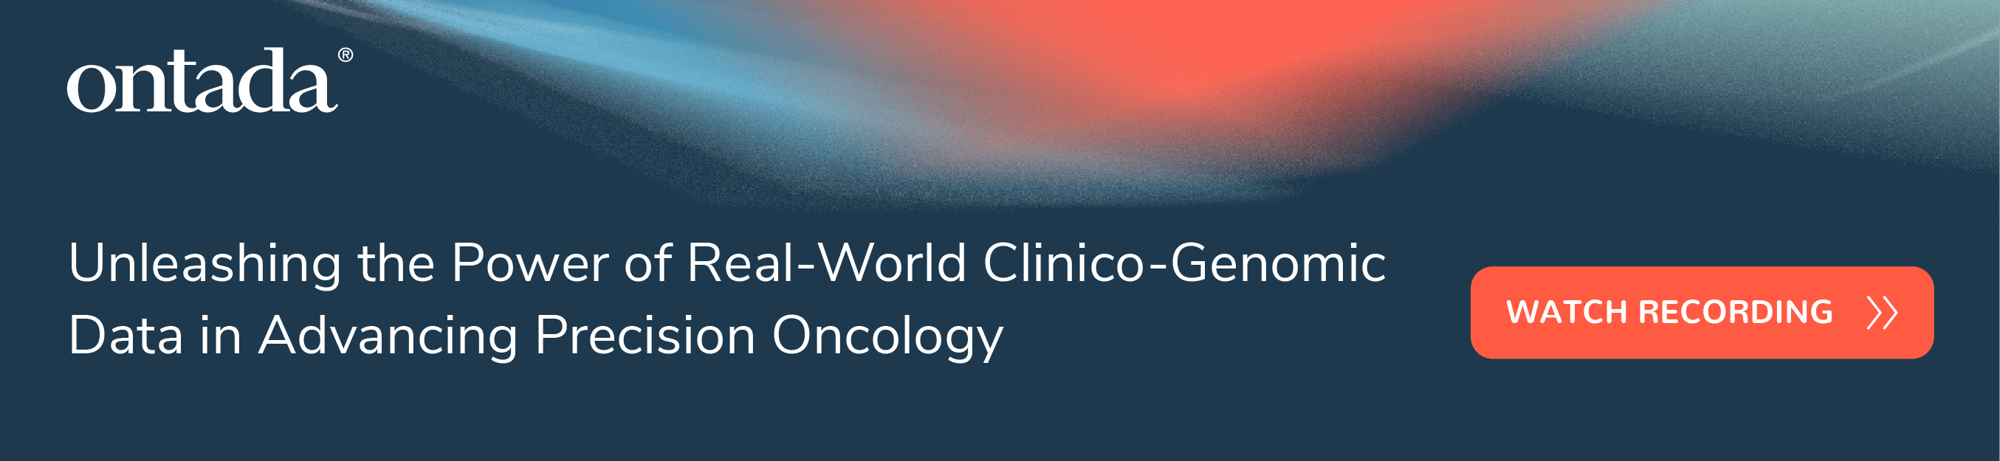 On-Demand Recording Clinico-Genomic Data in Advancing Precision Oncology